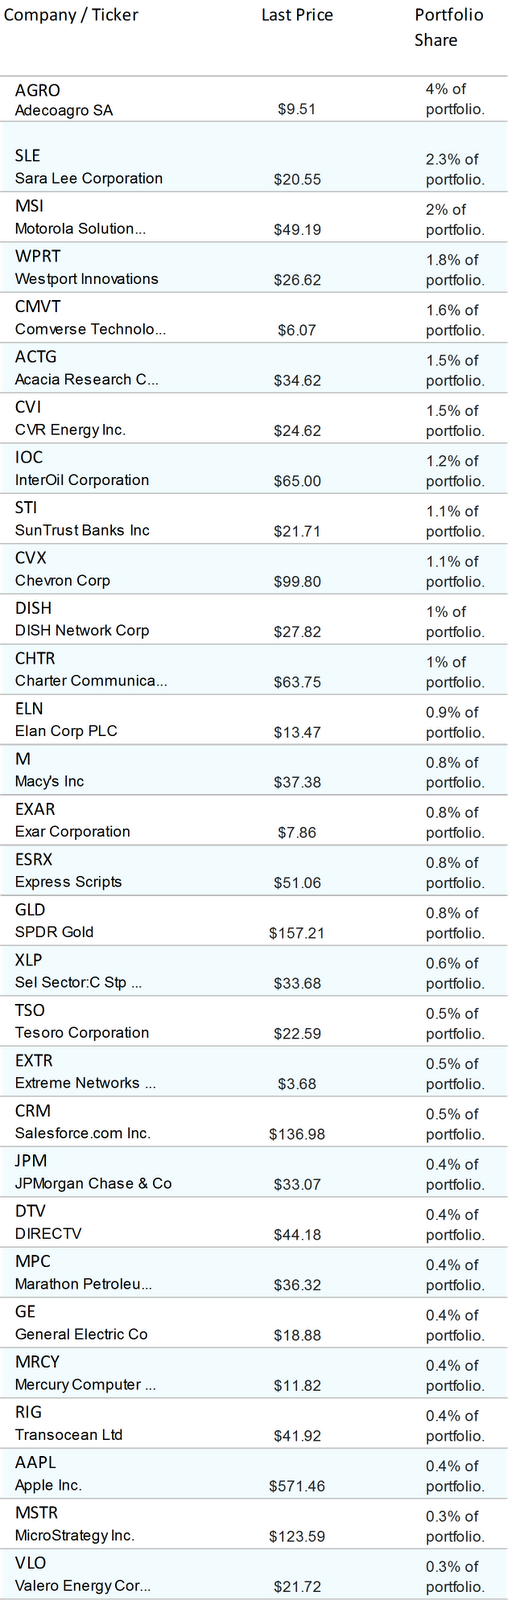 Here are the top 30 positions sorted by portfolio share